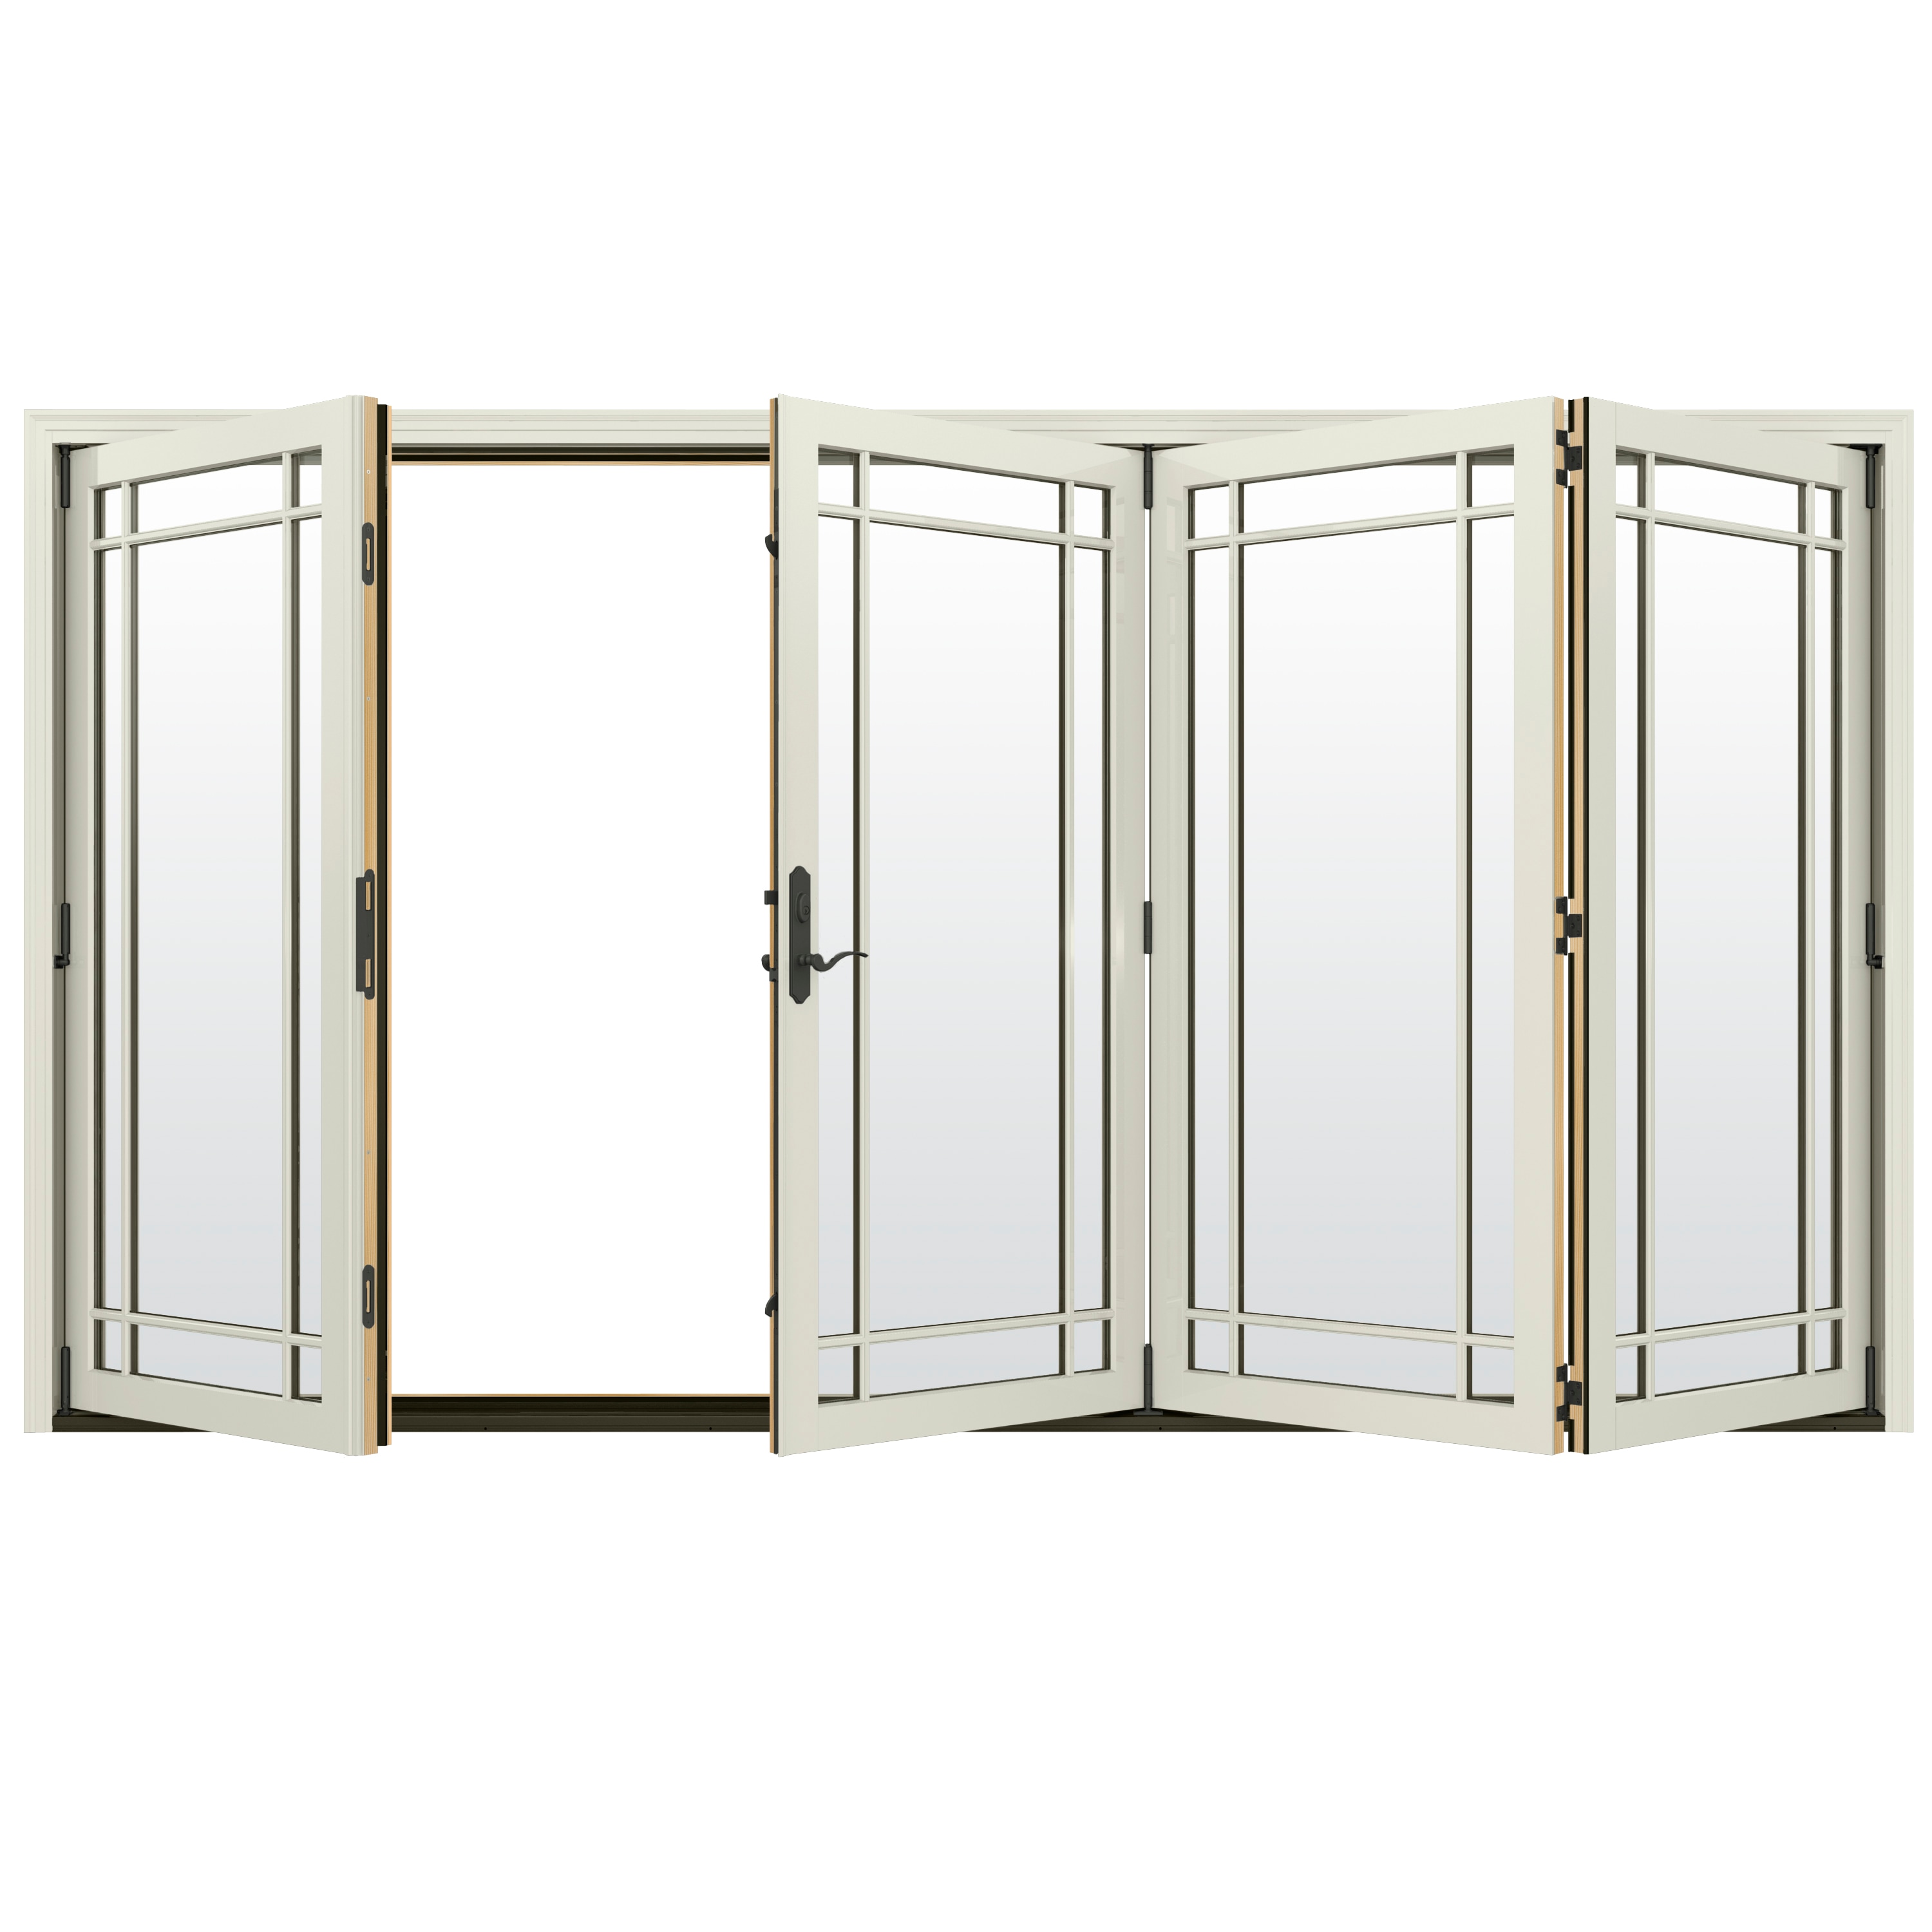 124-in x 80-in Low-e Argon Simulated Divided Light Vanilla Clad-wood Folding Right-Hand Outswing Patio Door in Off-White | - JELD-WEN LOWOLJW247800040